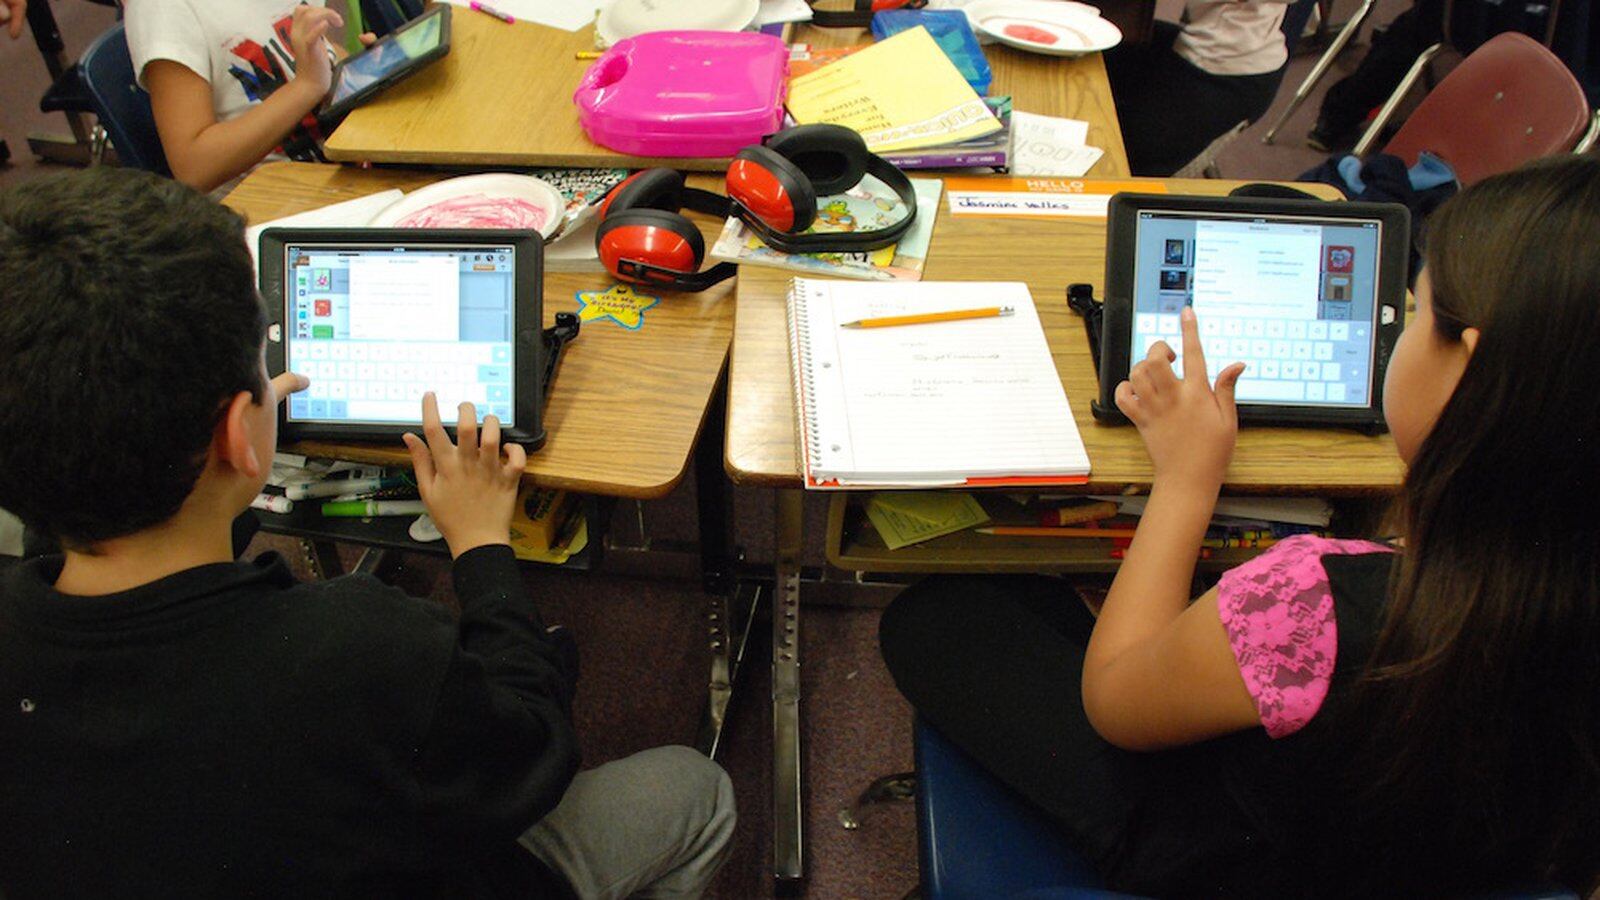 Students at Edgewater Elementary School in Jefferson County work on iPads during class.